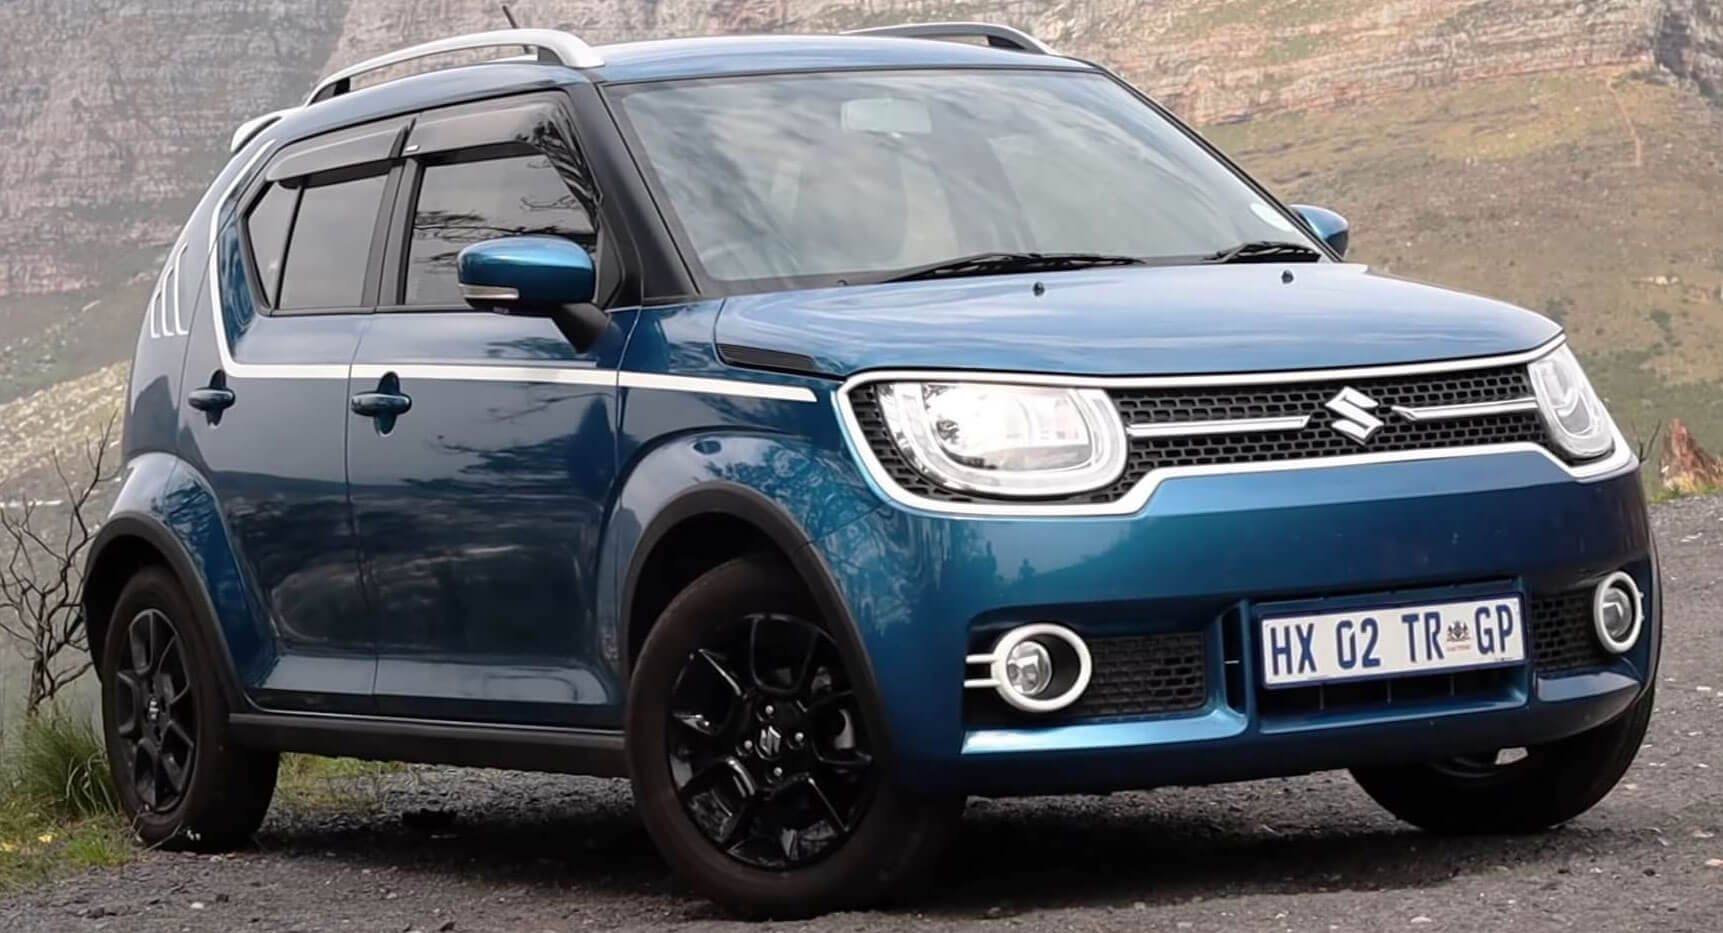 Driving The 2019 Suzuki Ignis For 6 Months Was A Surprise-Free Experience